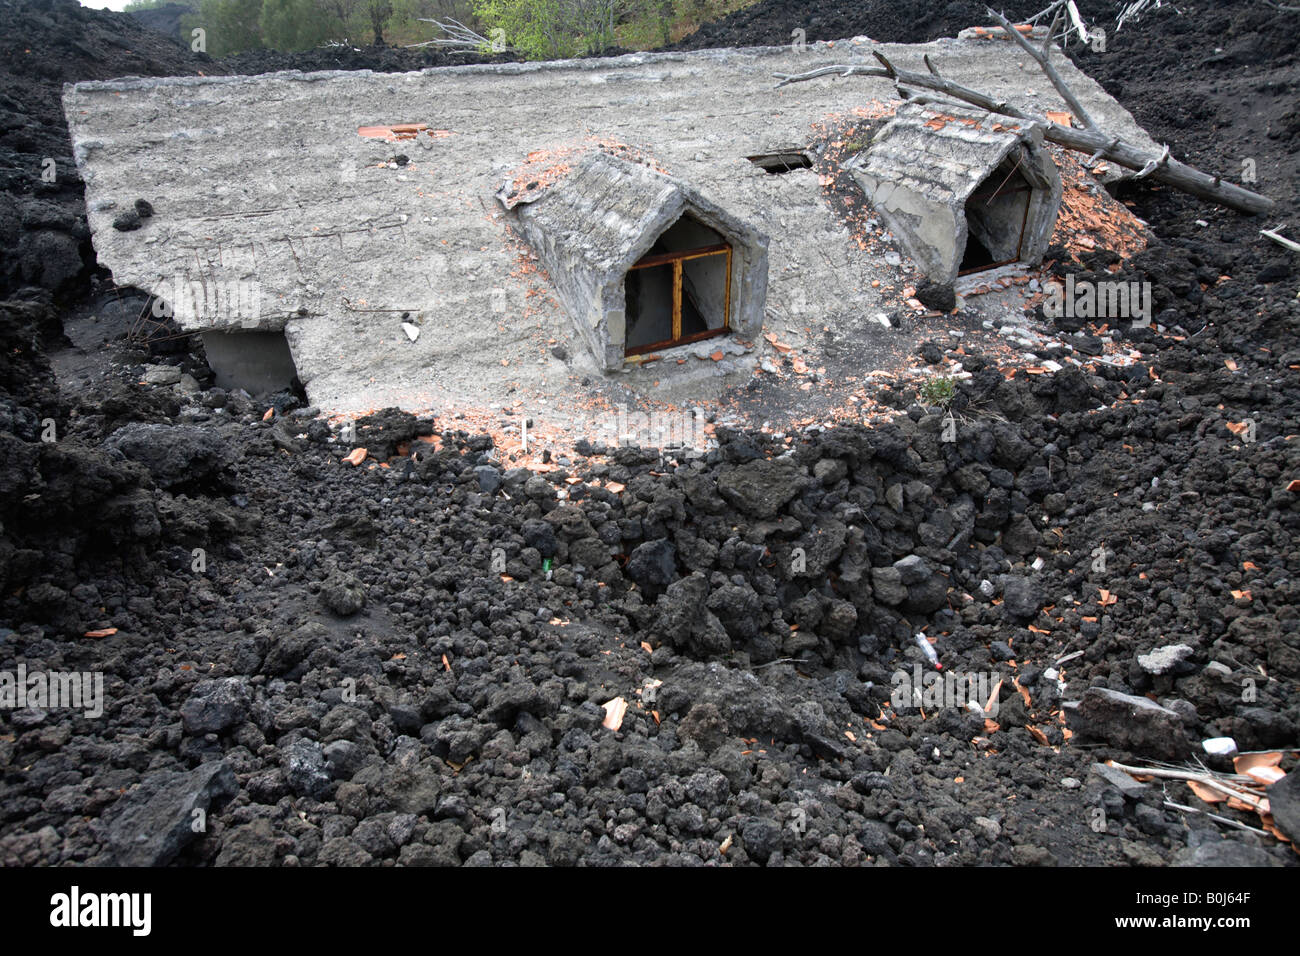 House destroyed by lava, Etna volcano, Sicily, Italy Stock Photo